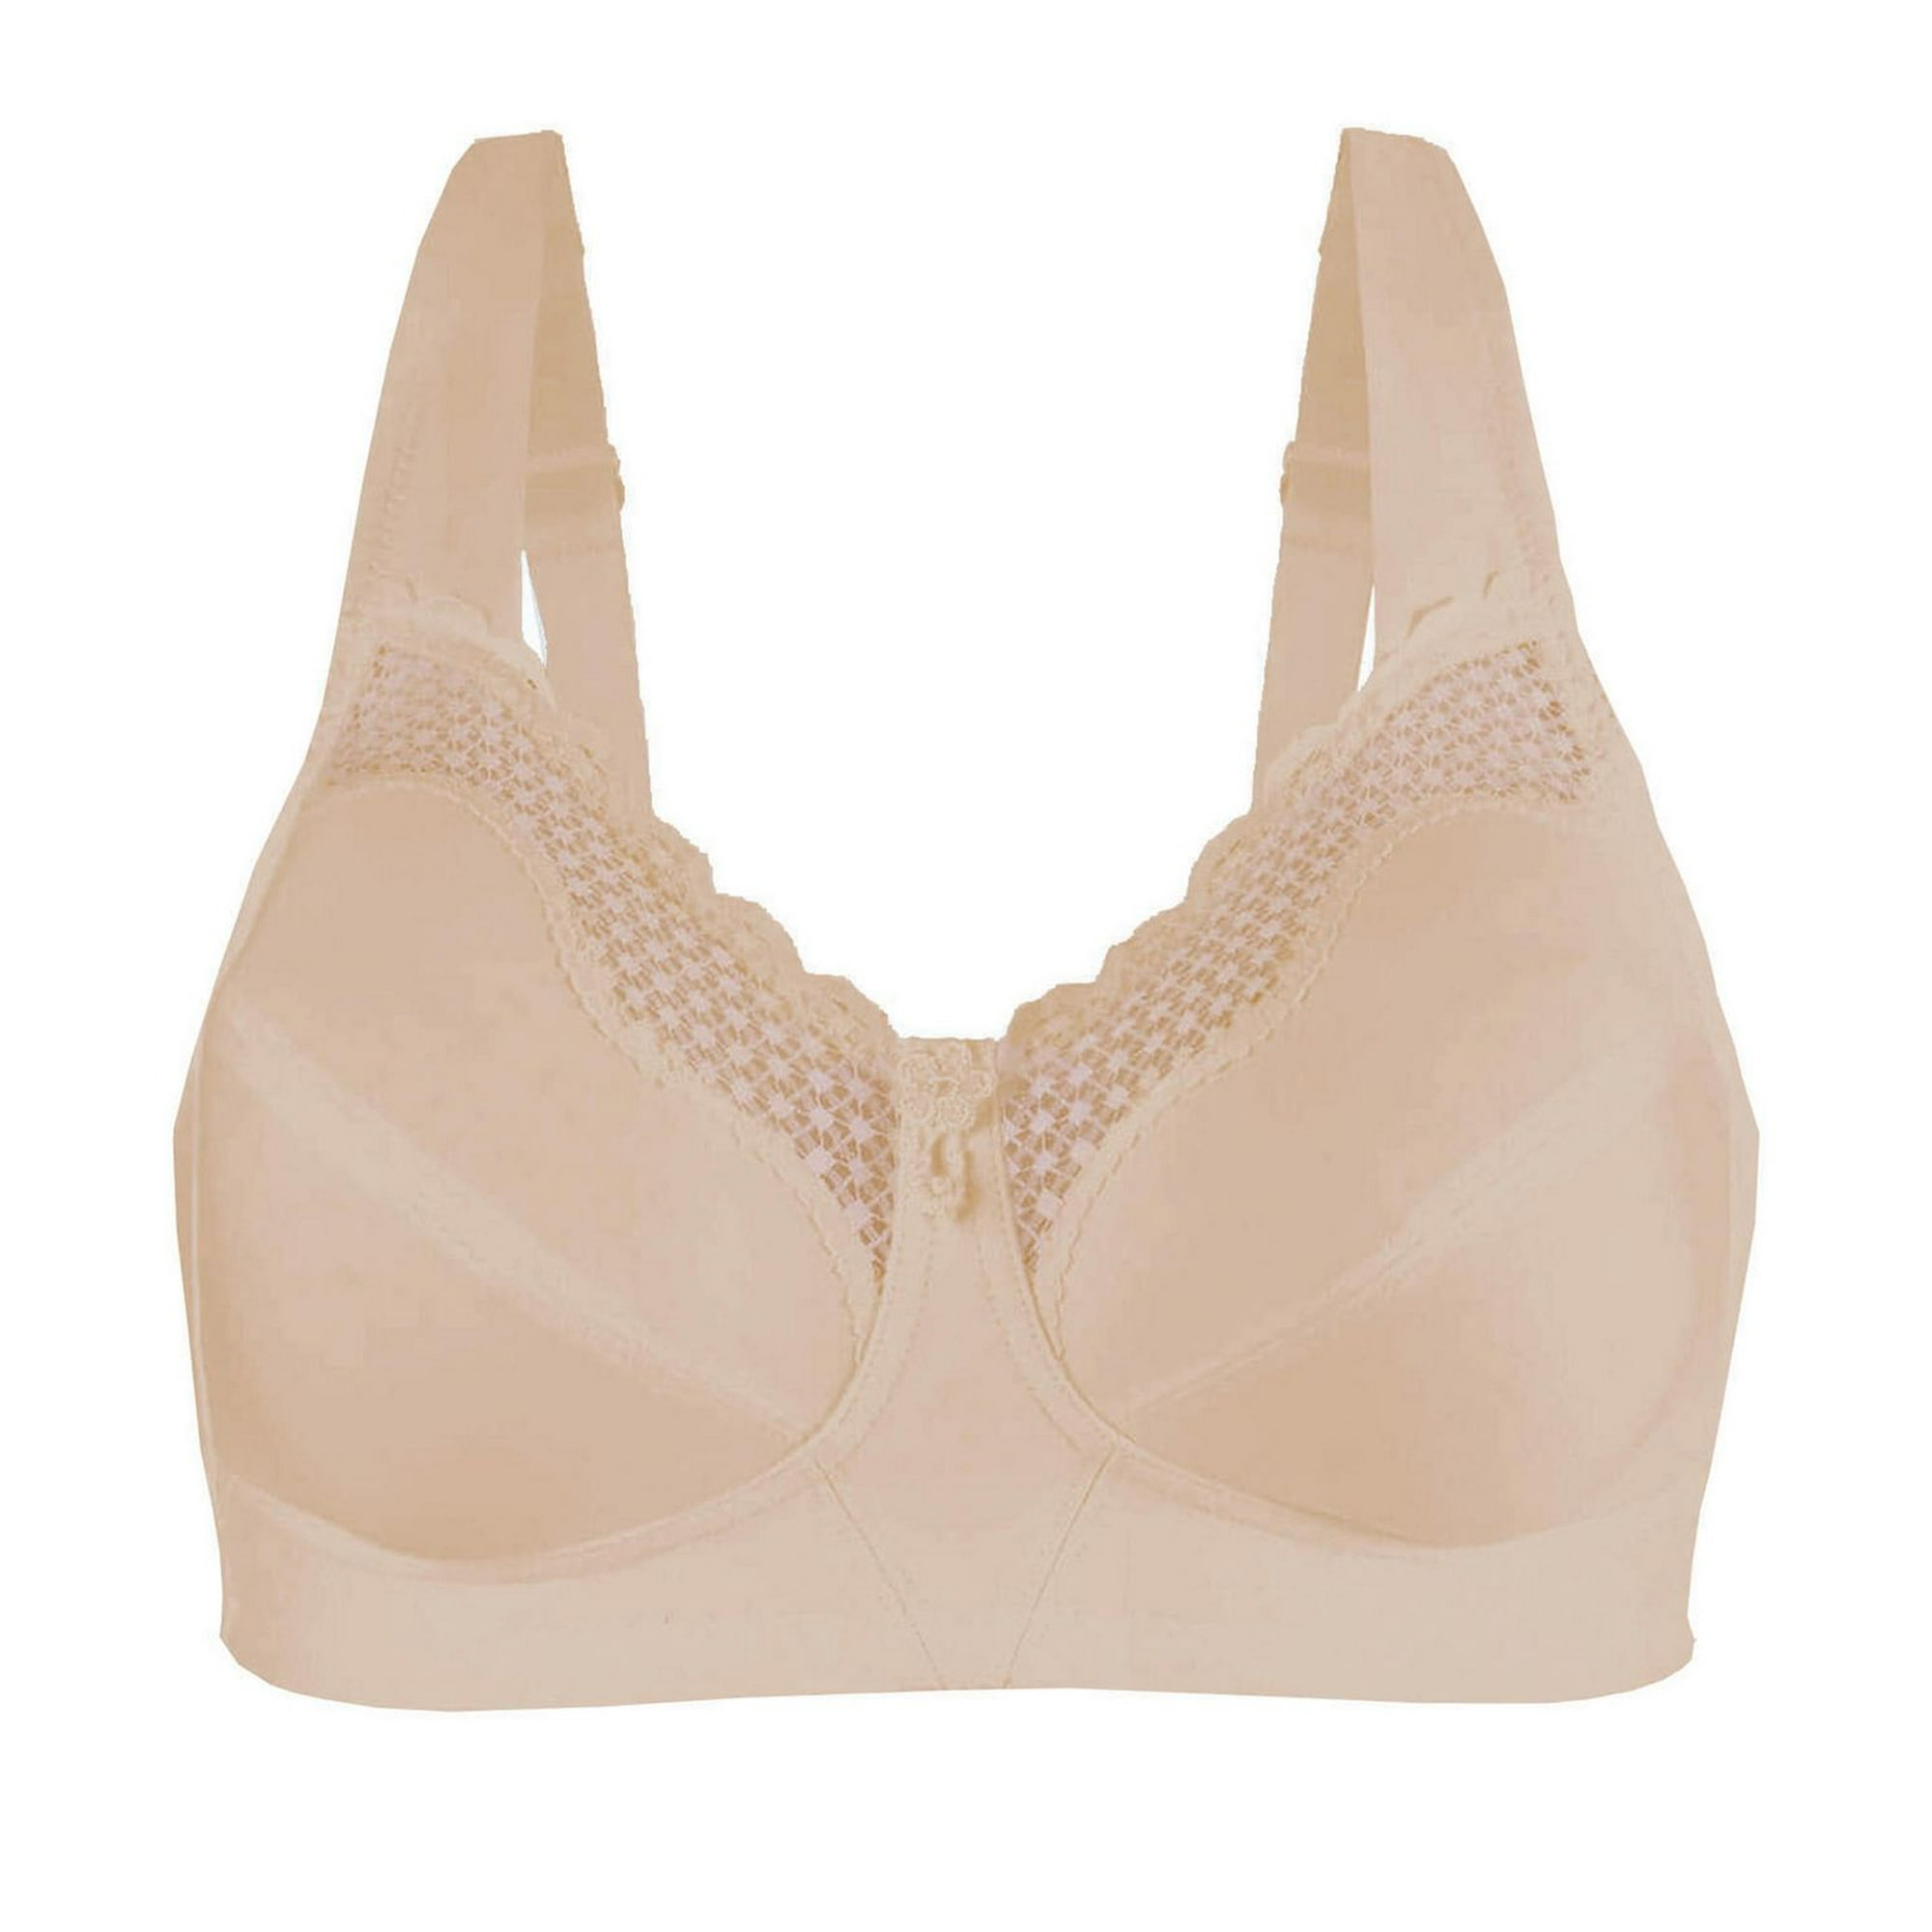 Buy White Recycled Lace Full Cup Comfort Bra - 40C, Bras